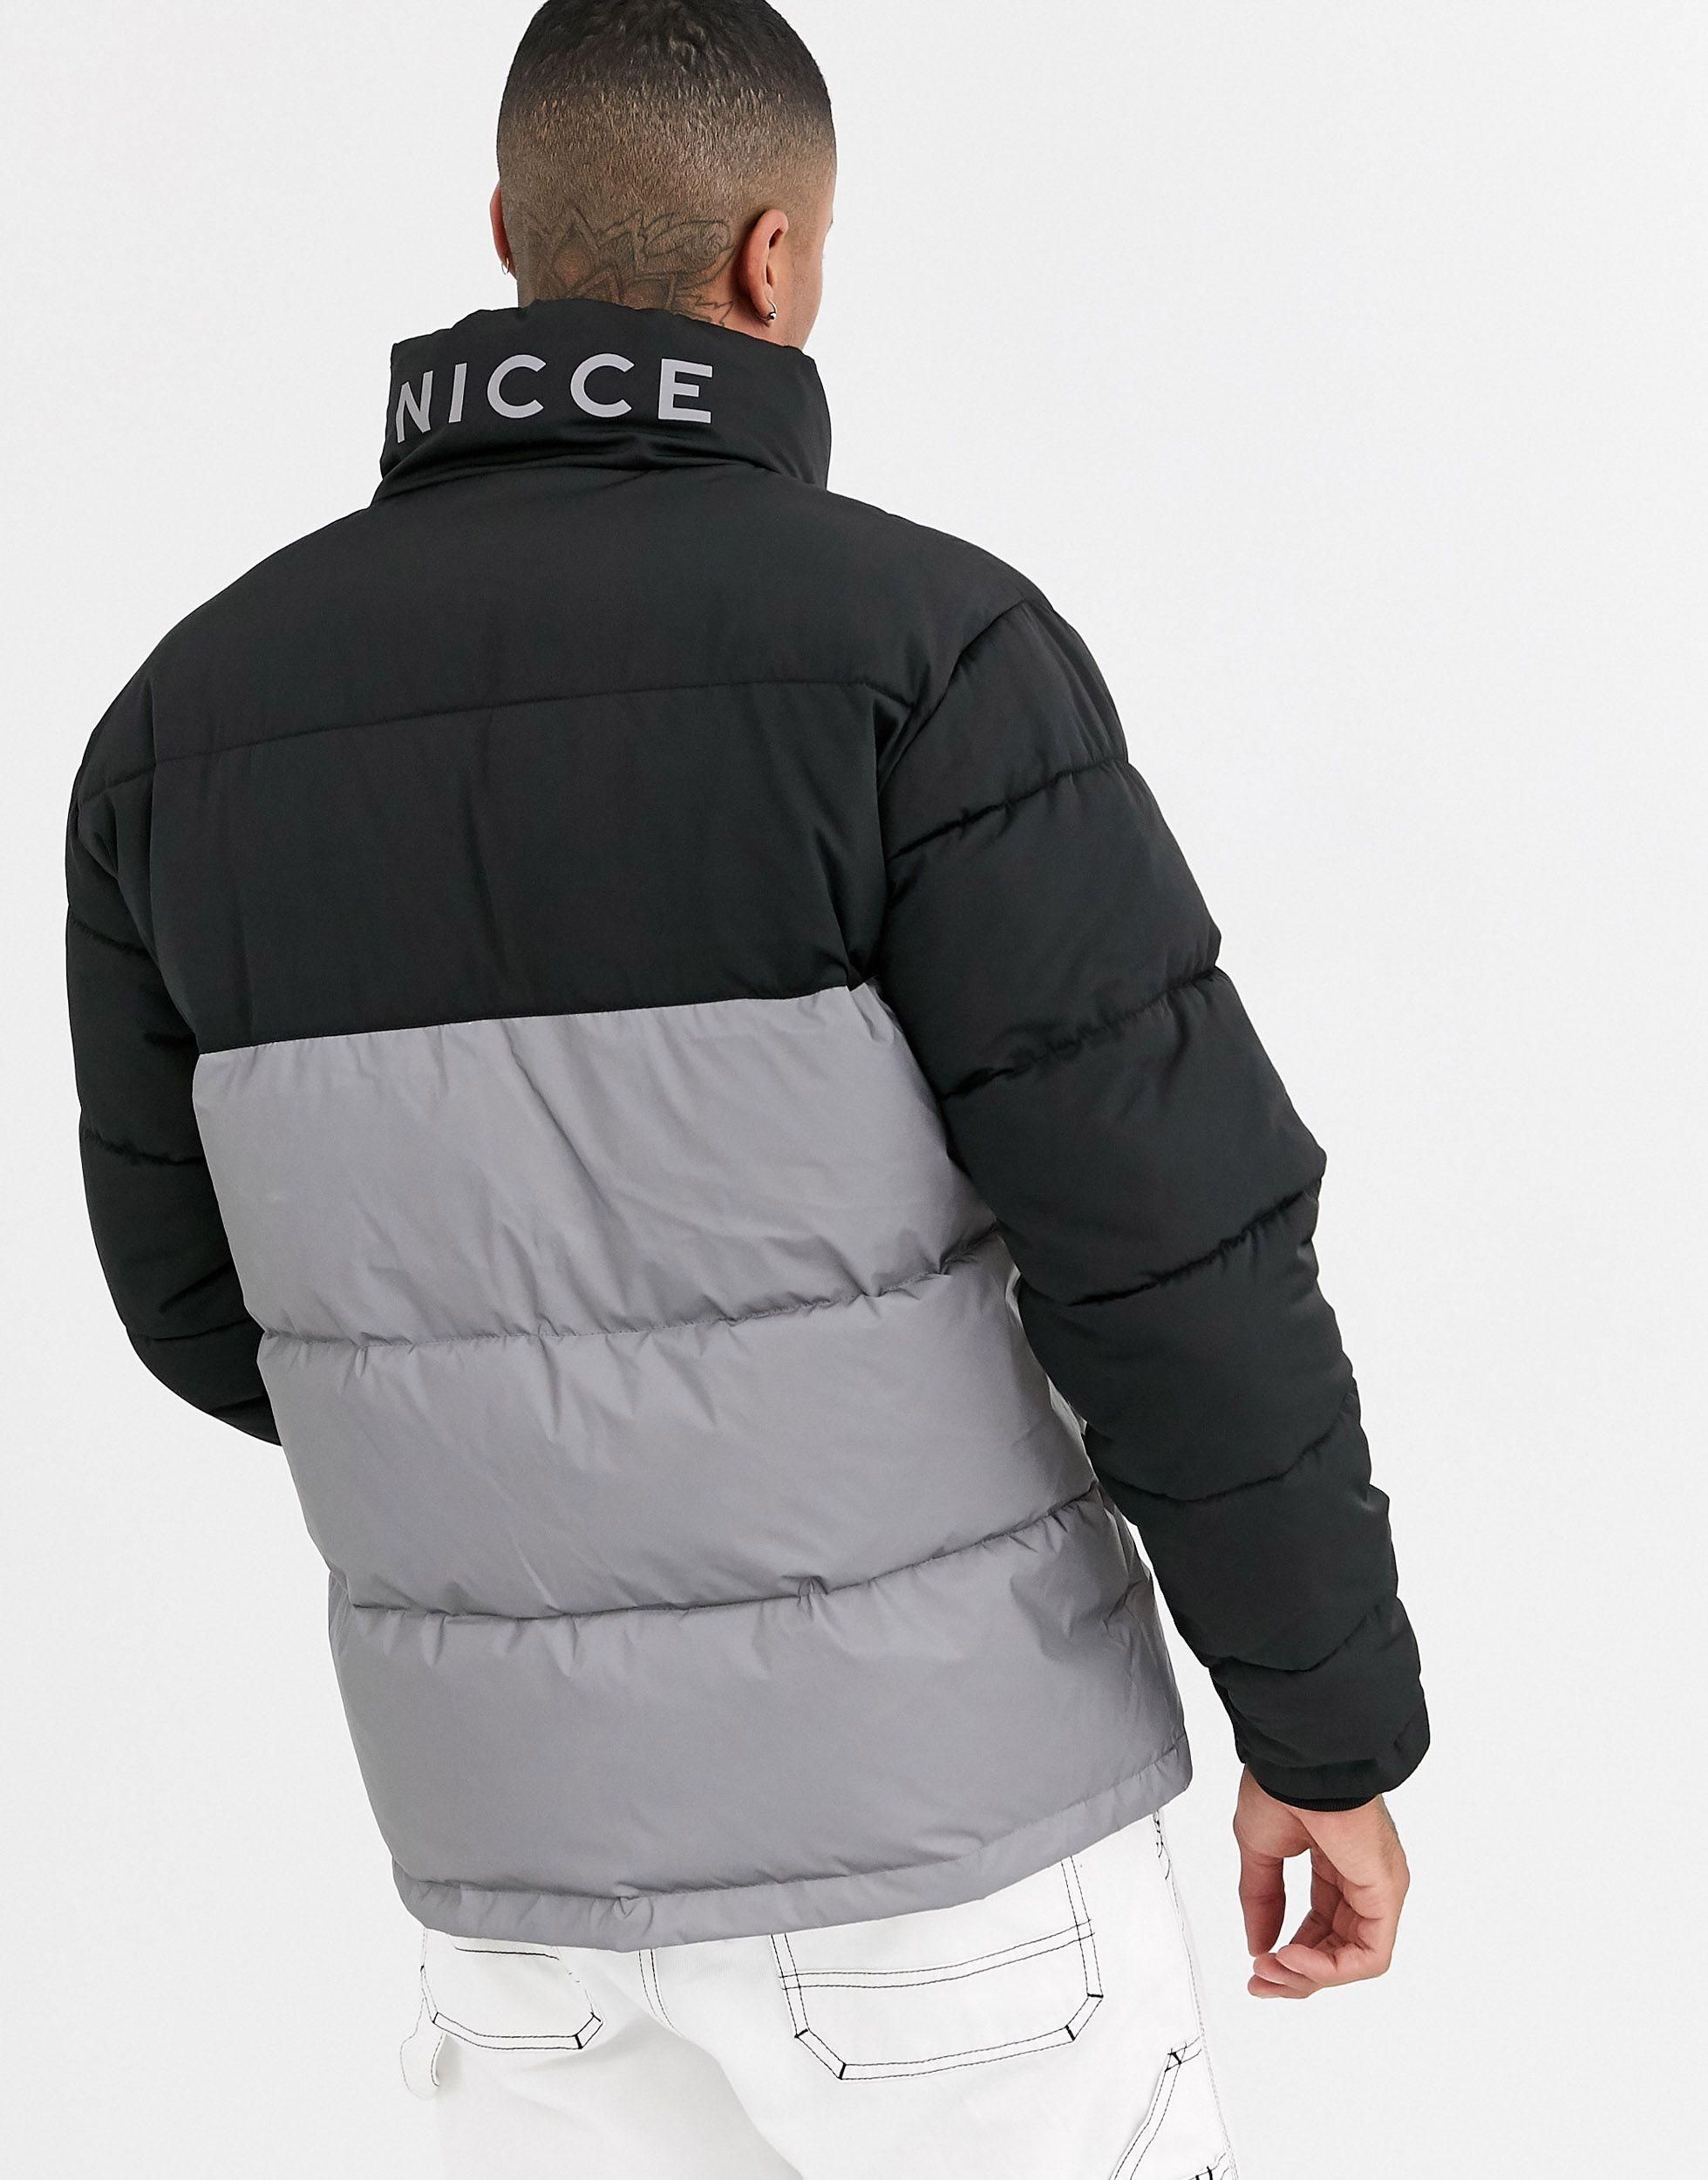 Nicce London Synthetic Puffer Jacket in Silver (Metallic) for Men - Lyst